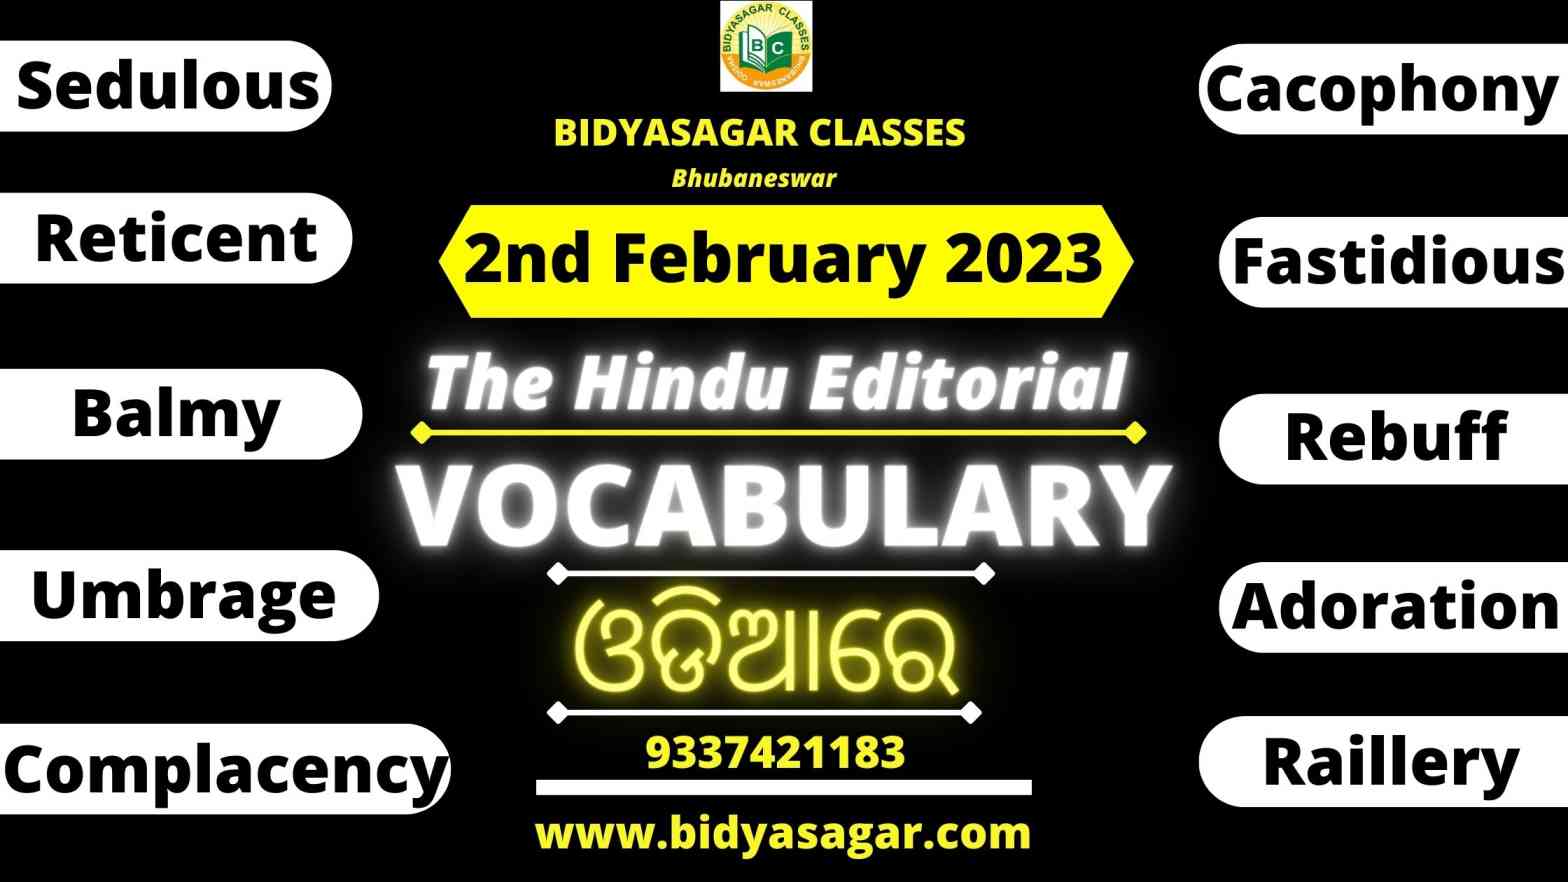 The Hindu Editorial Vocabulary of 2nd February 2023